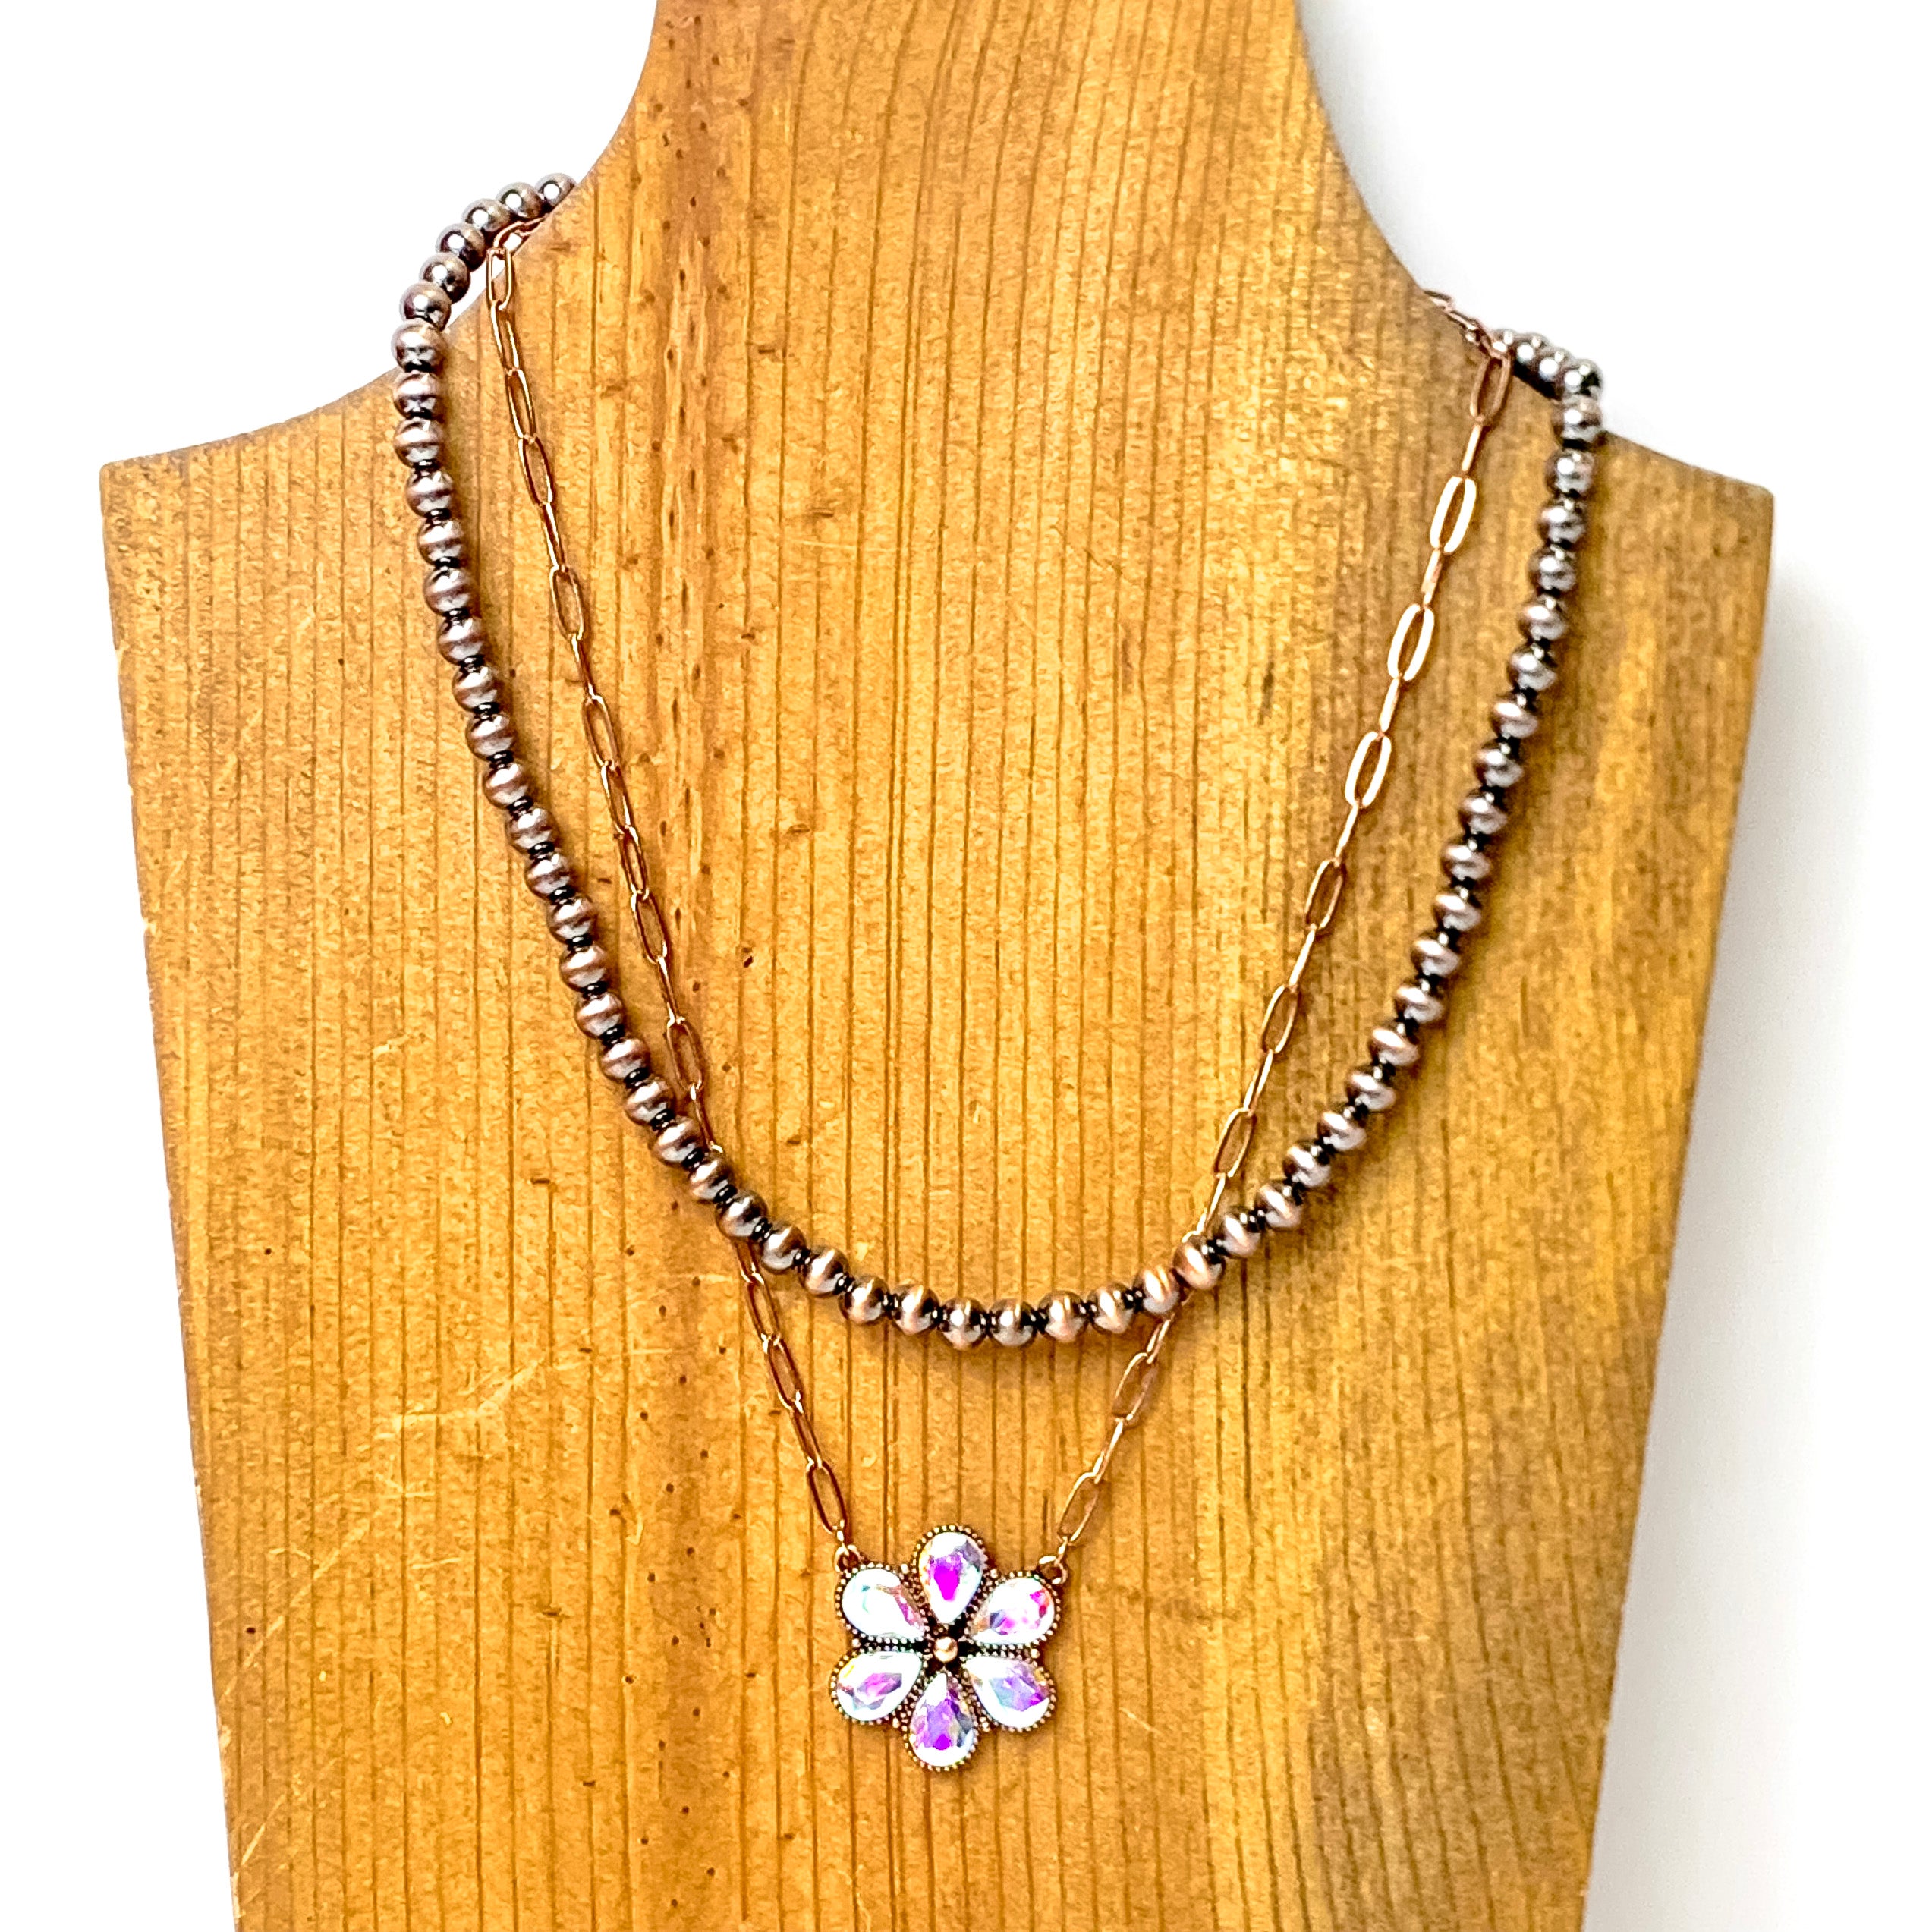 Prairie Petals Faux Navajo Pearl and Chain Necklace in Copper Tone - Giddy Up Glamour Boutique